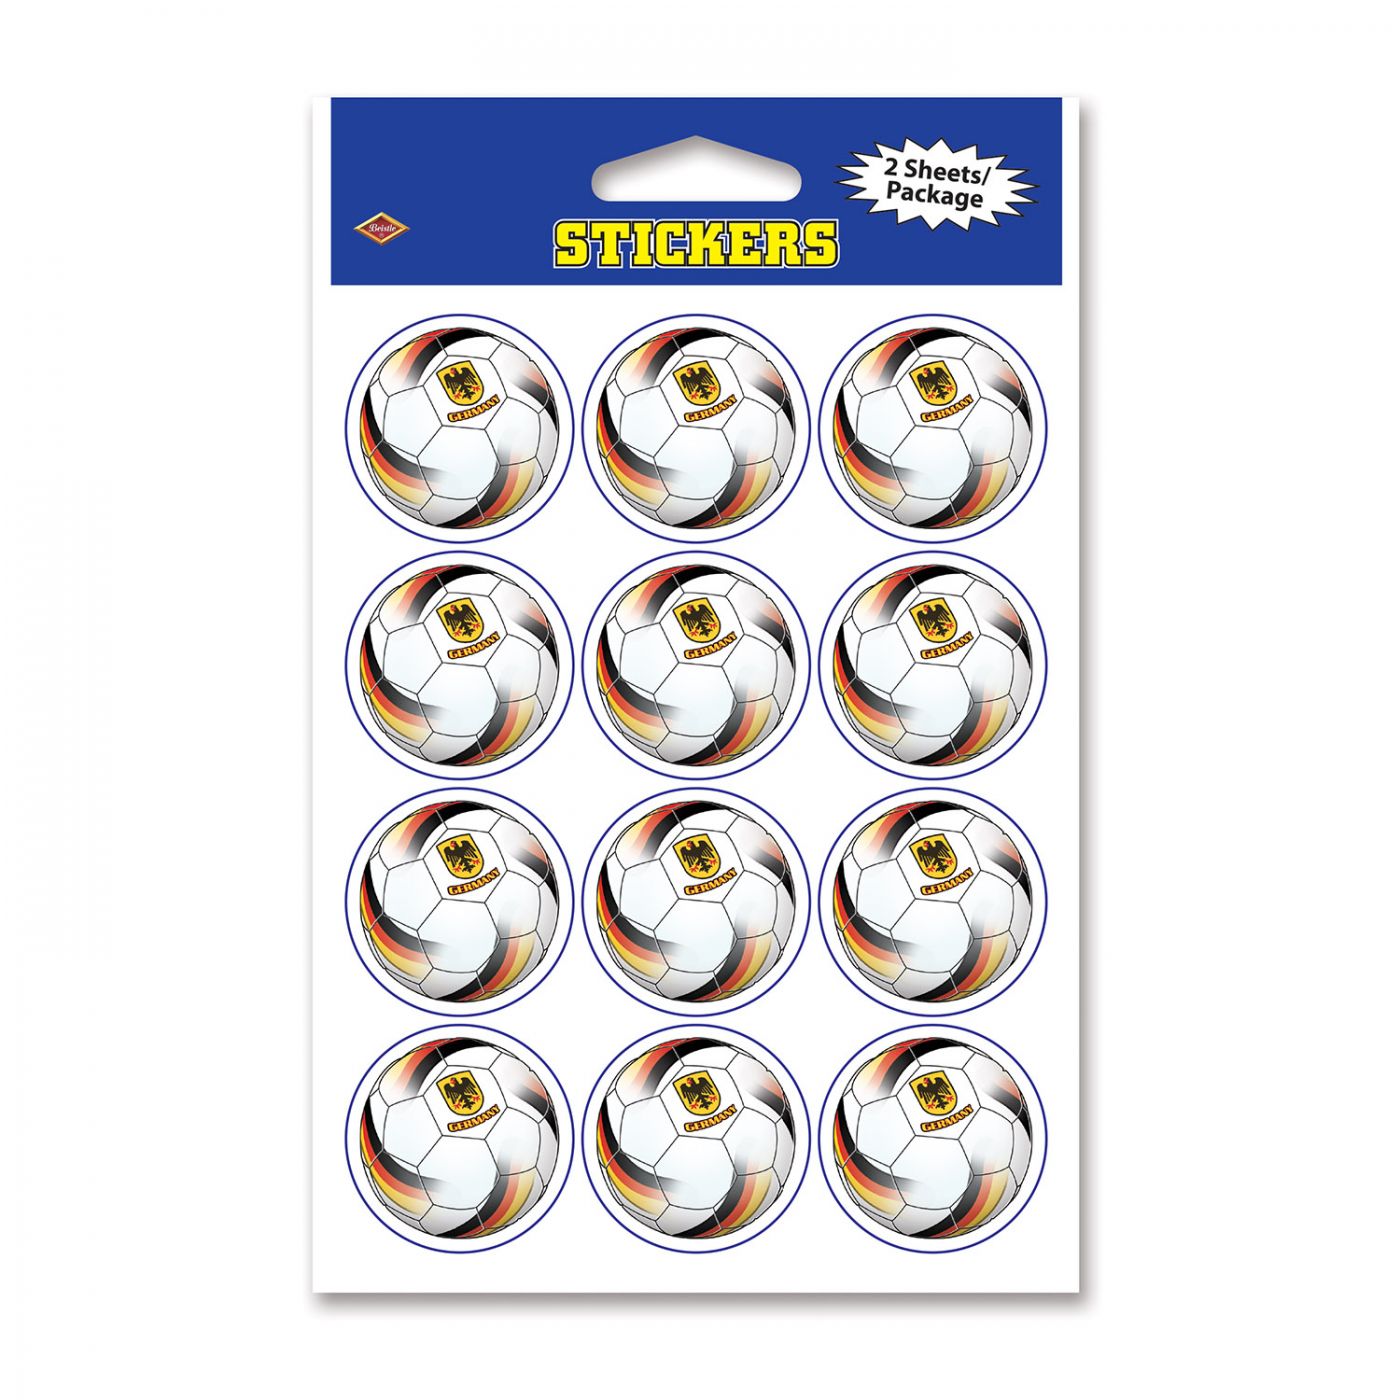 Stickers - Germany image